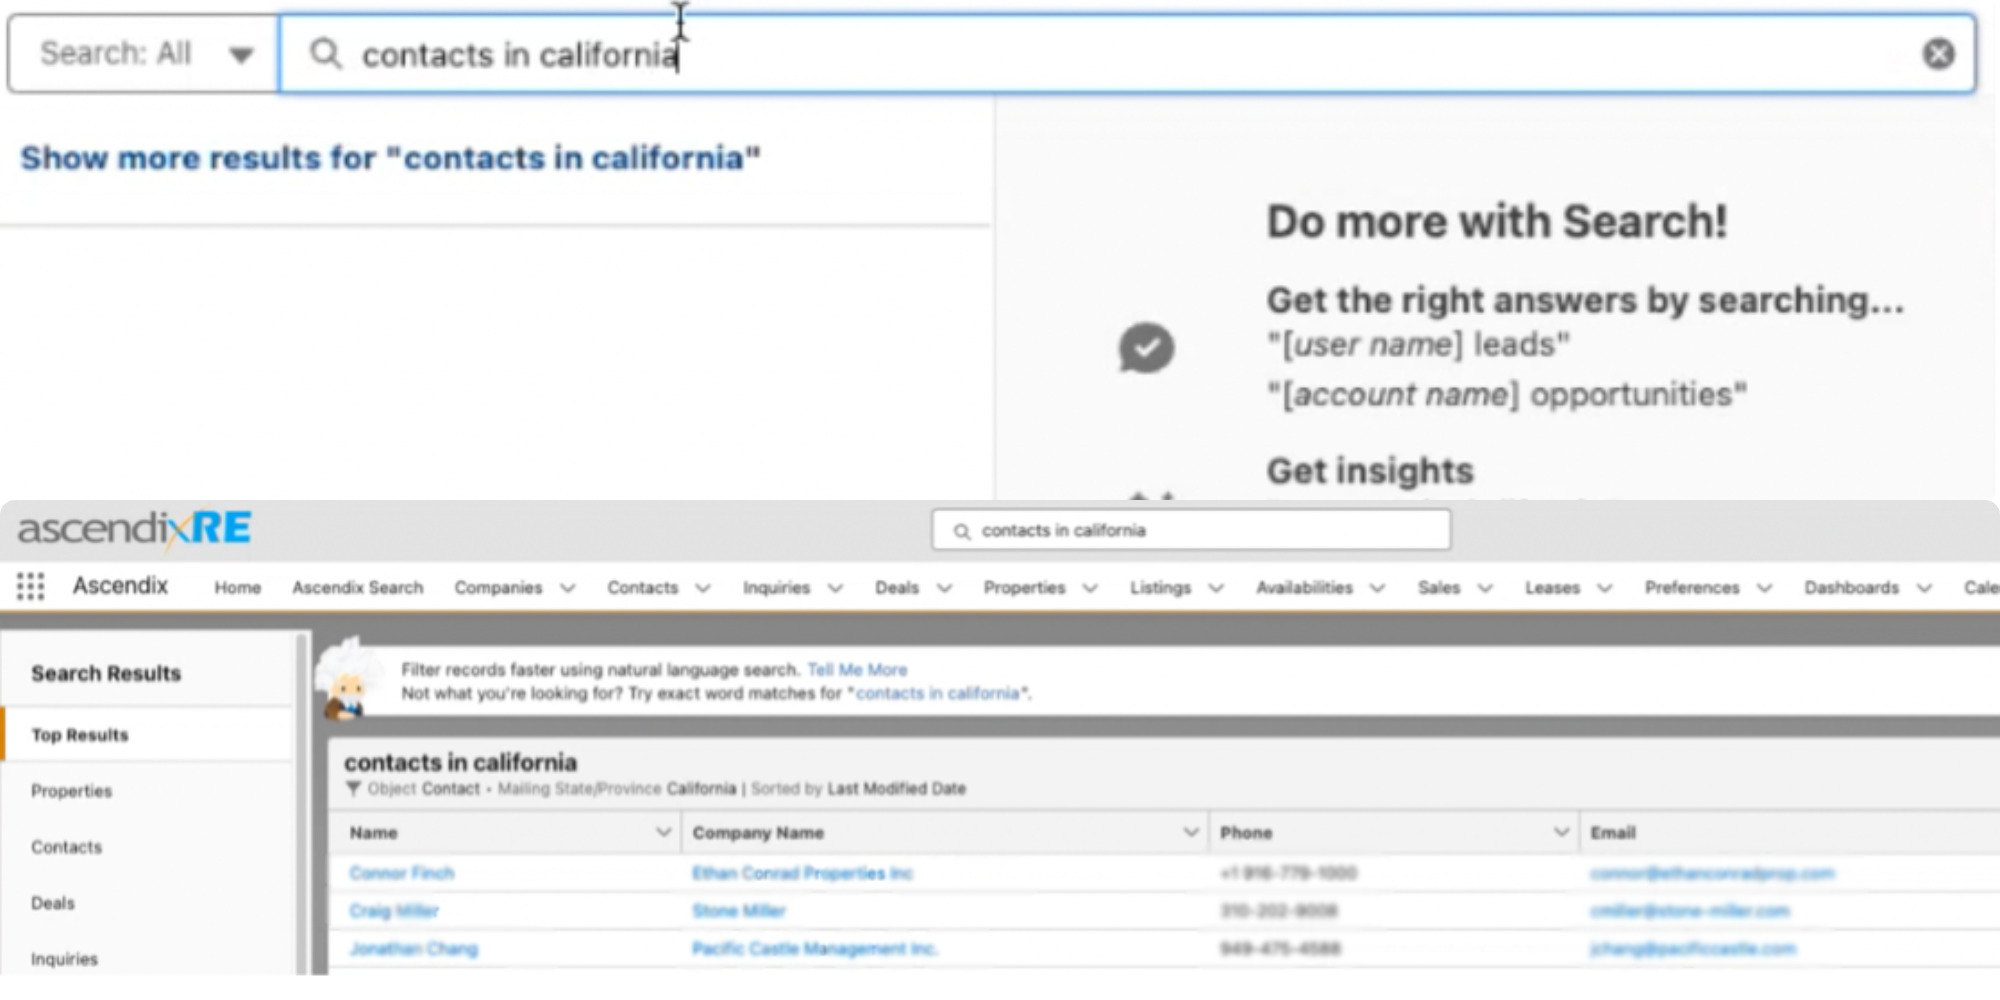 All Contacts in California Search Results